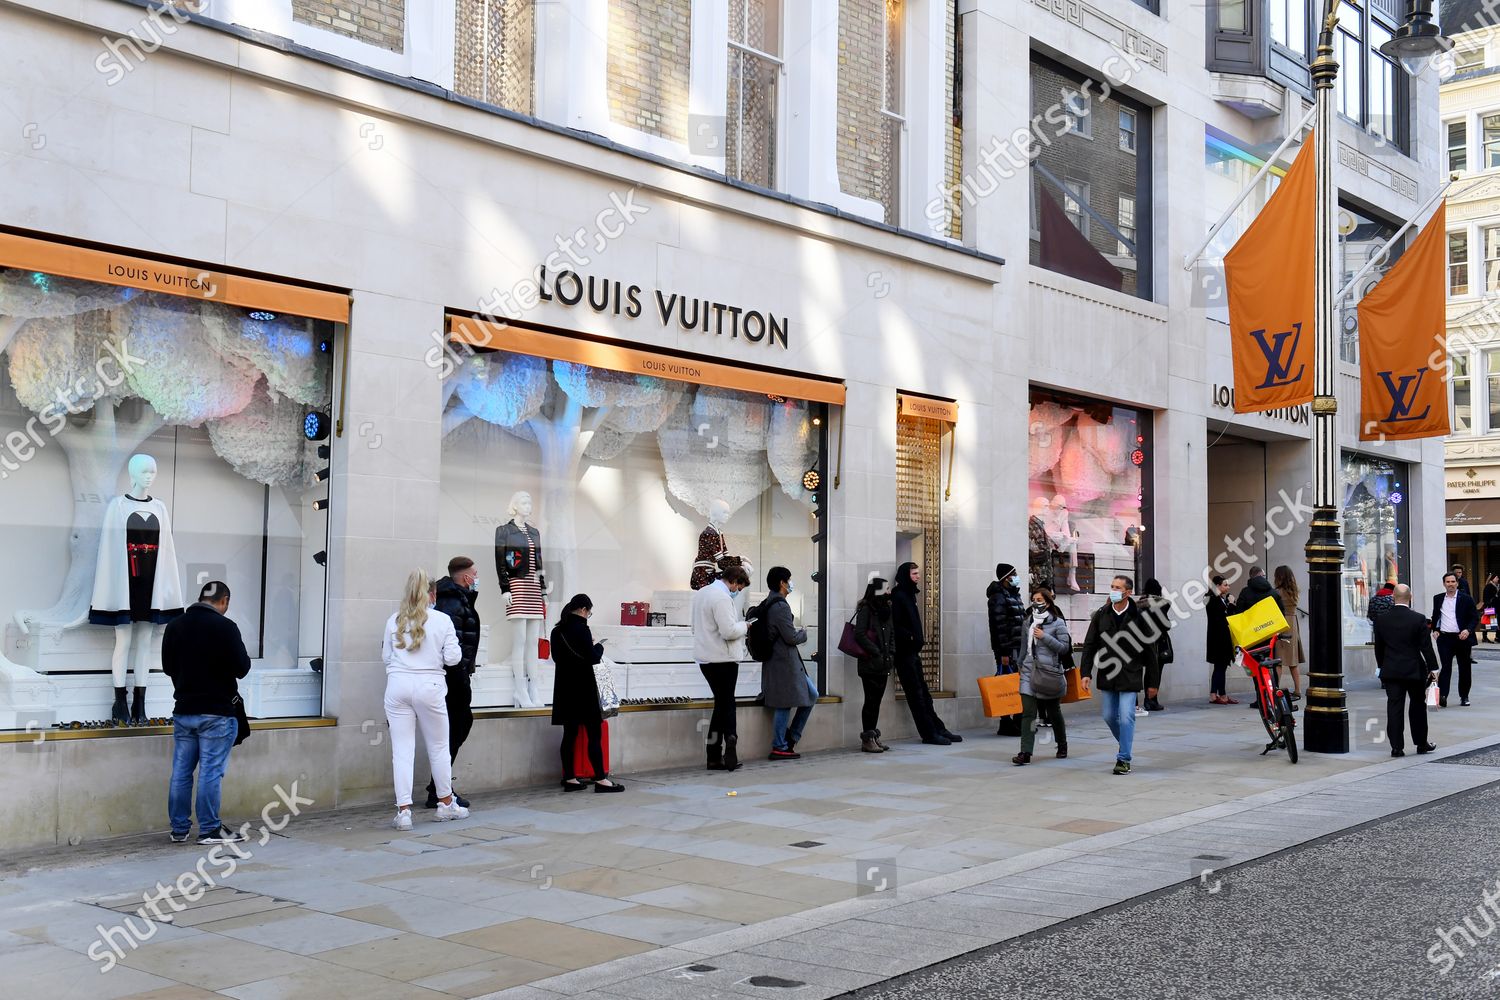 Where Is Louis Vuitton Store In London